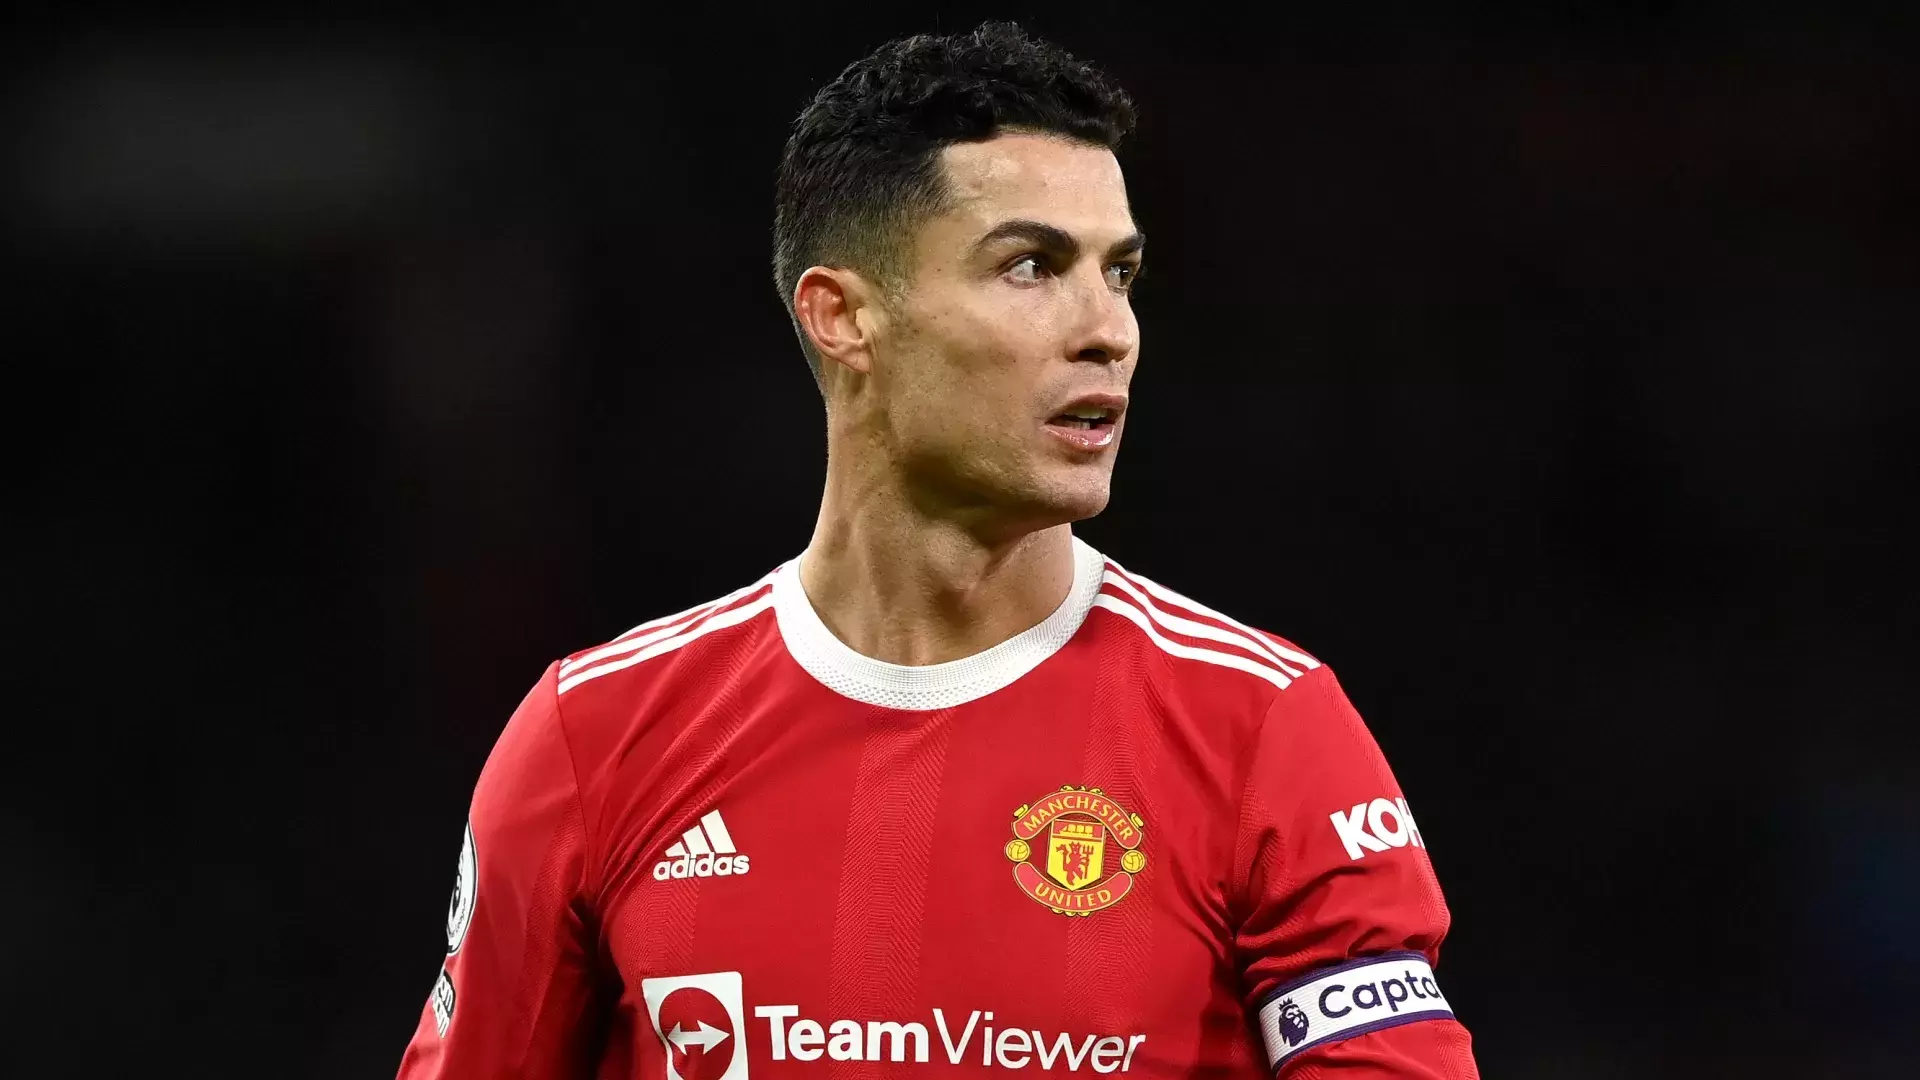 Ronaldo wishes to leave Manchester United